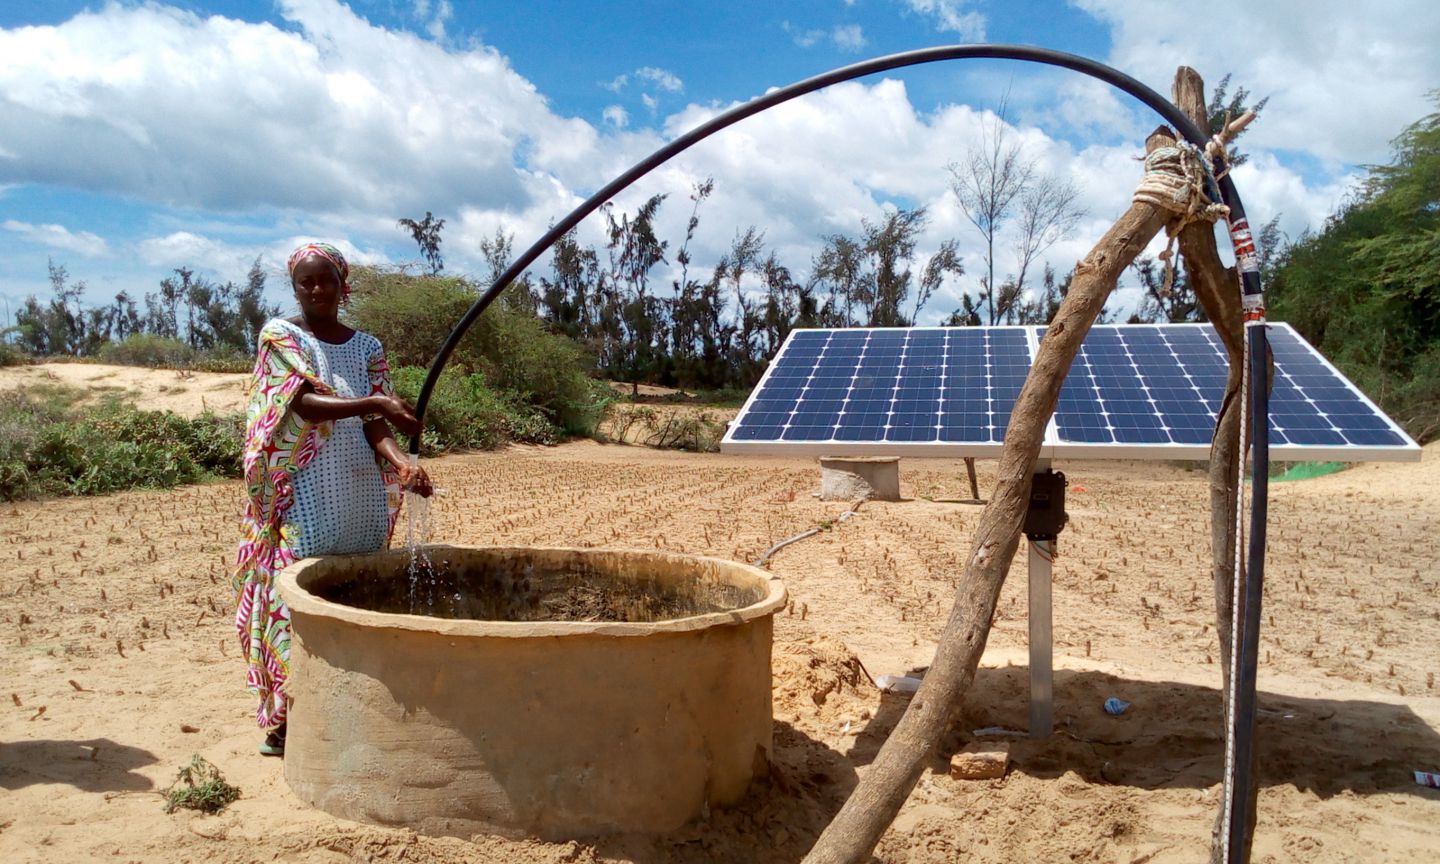 The market gardening entrepreneur modernising rural agriculture, with the help of solar power